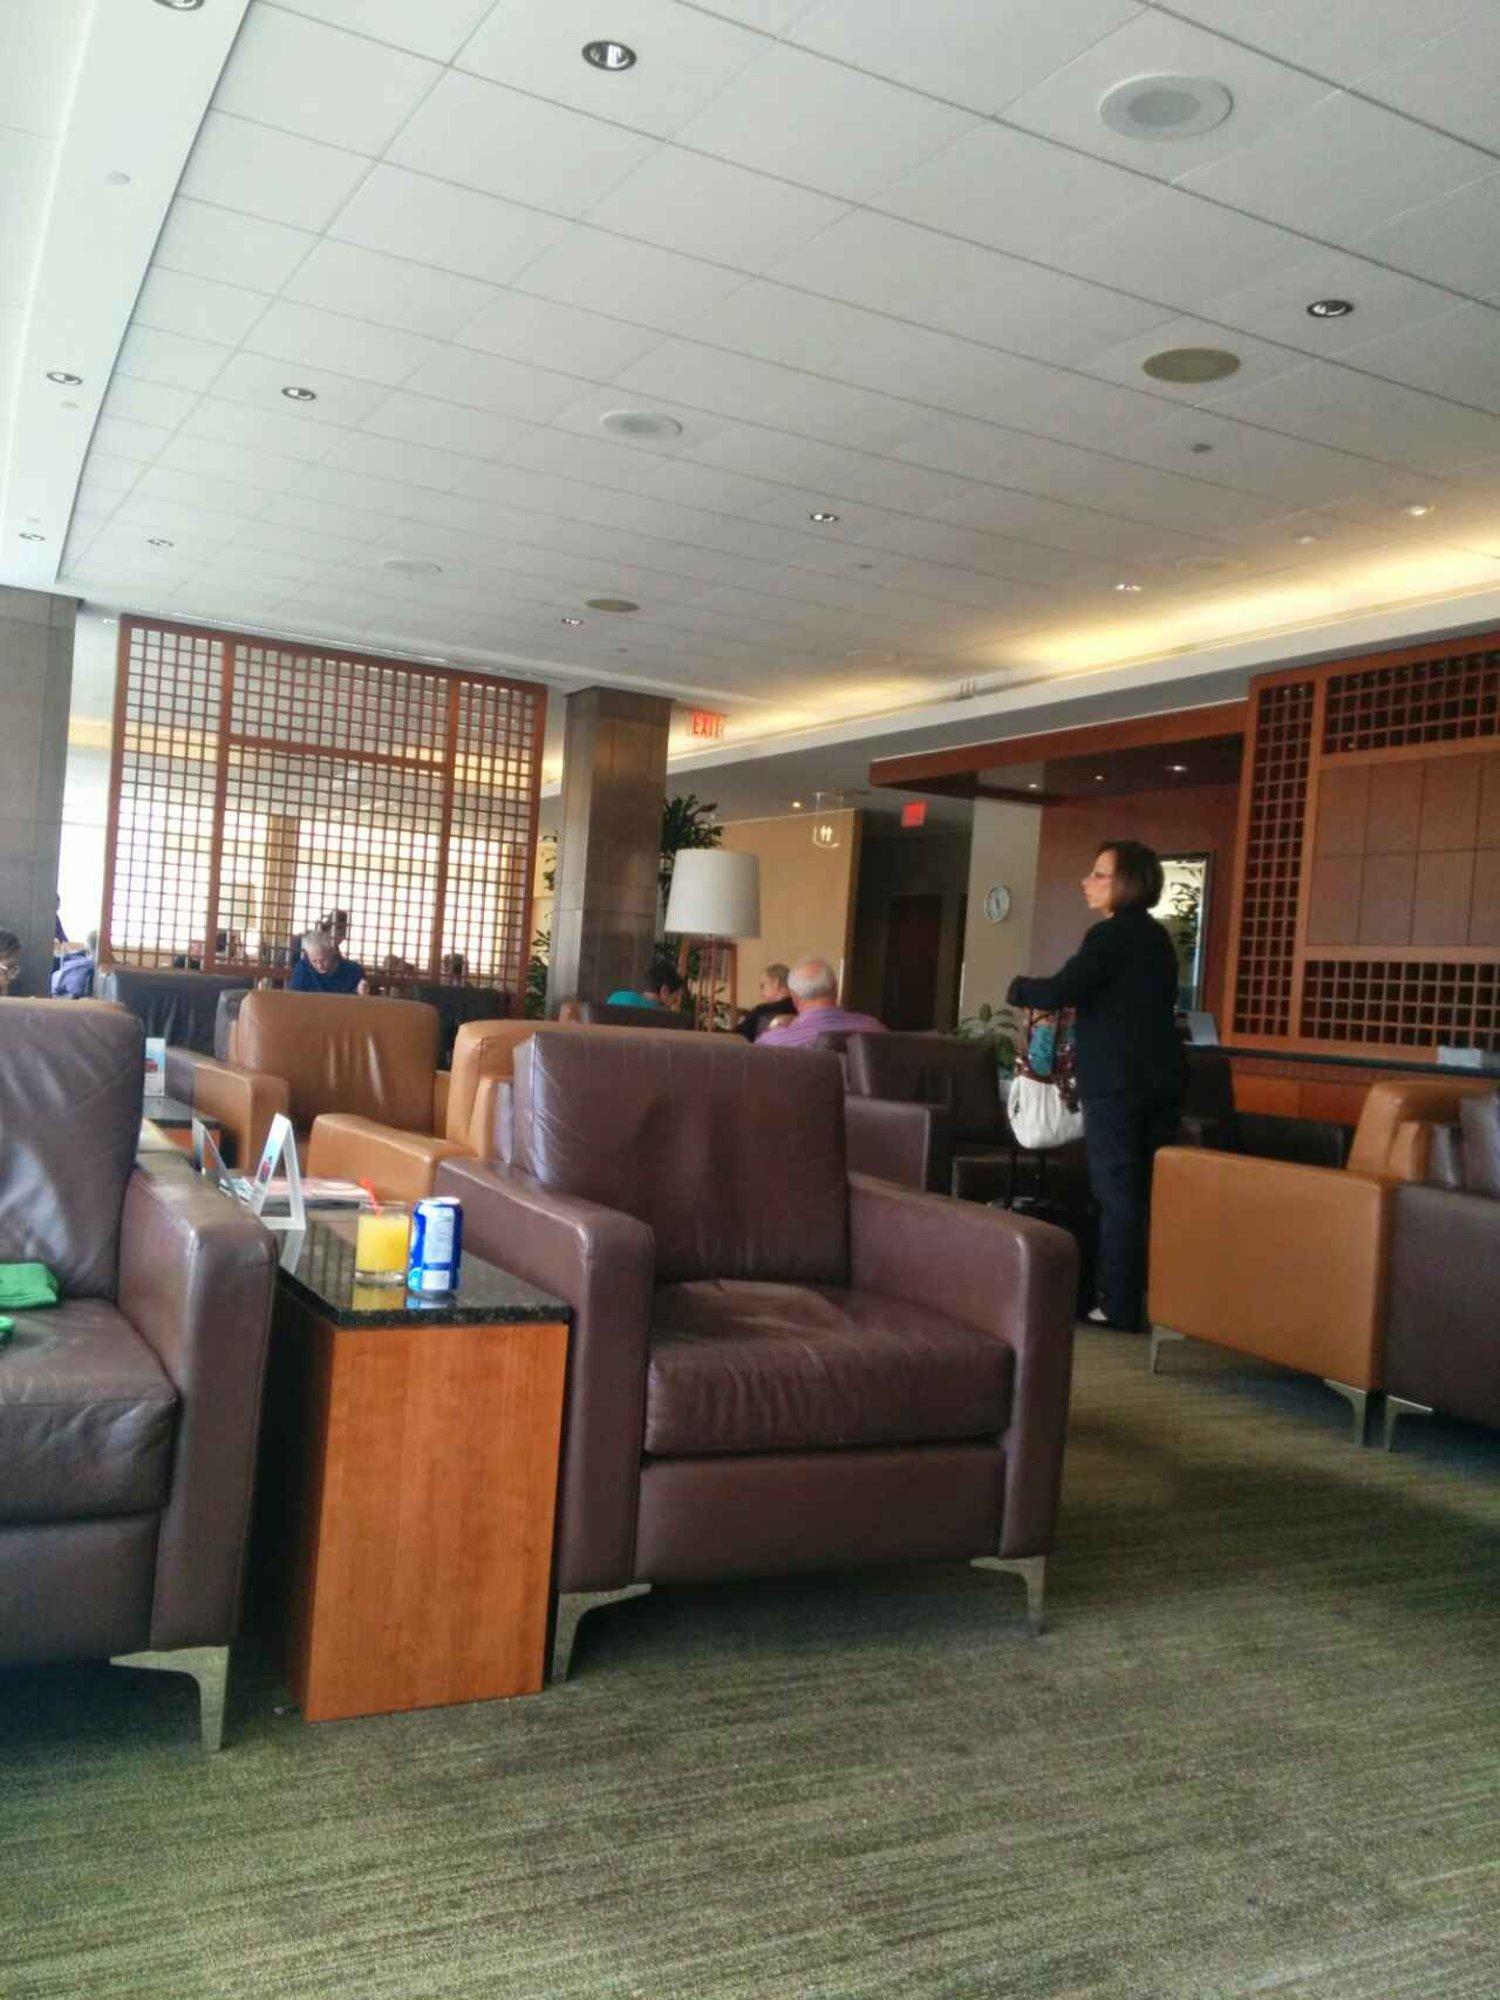 Air Canada Maple Leaf Lounge image 4 of 9